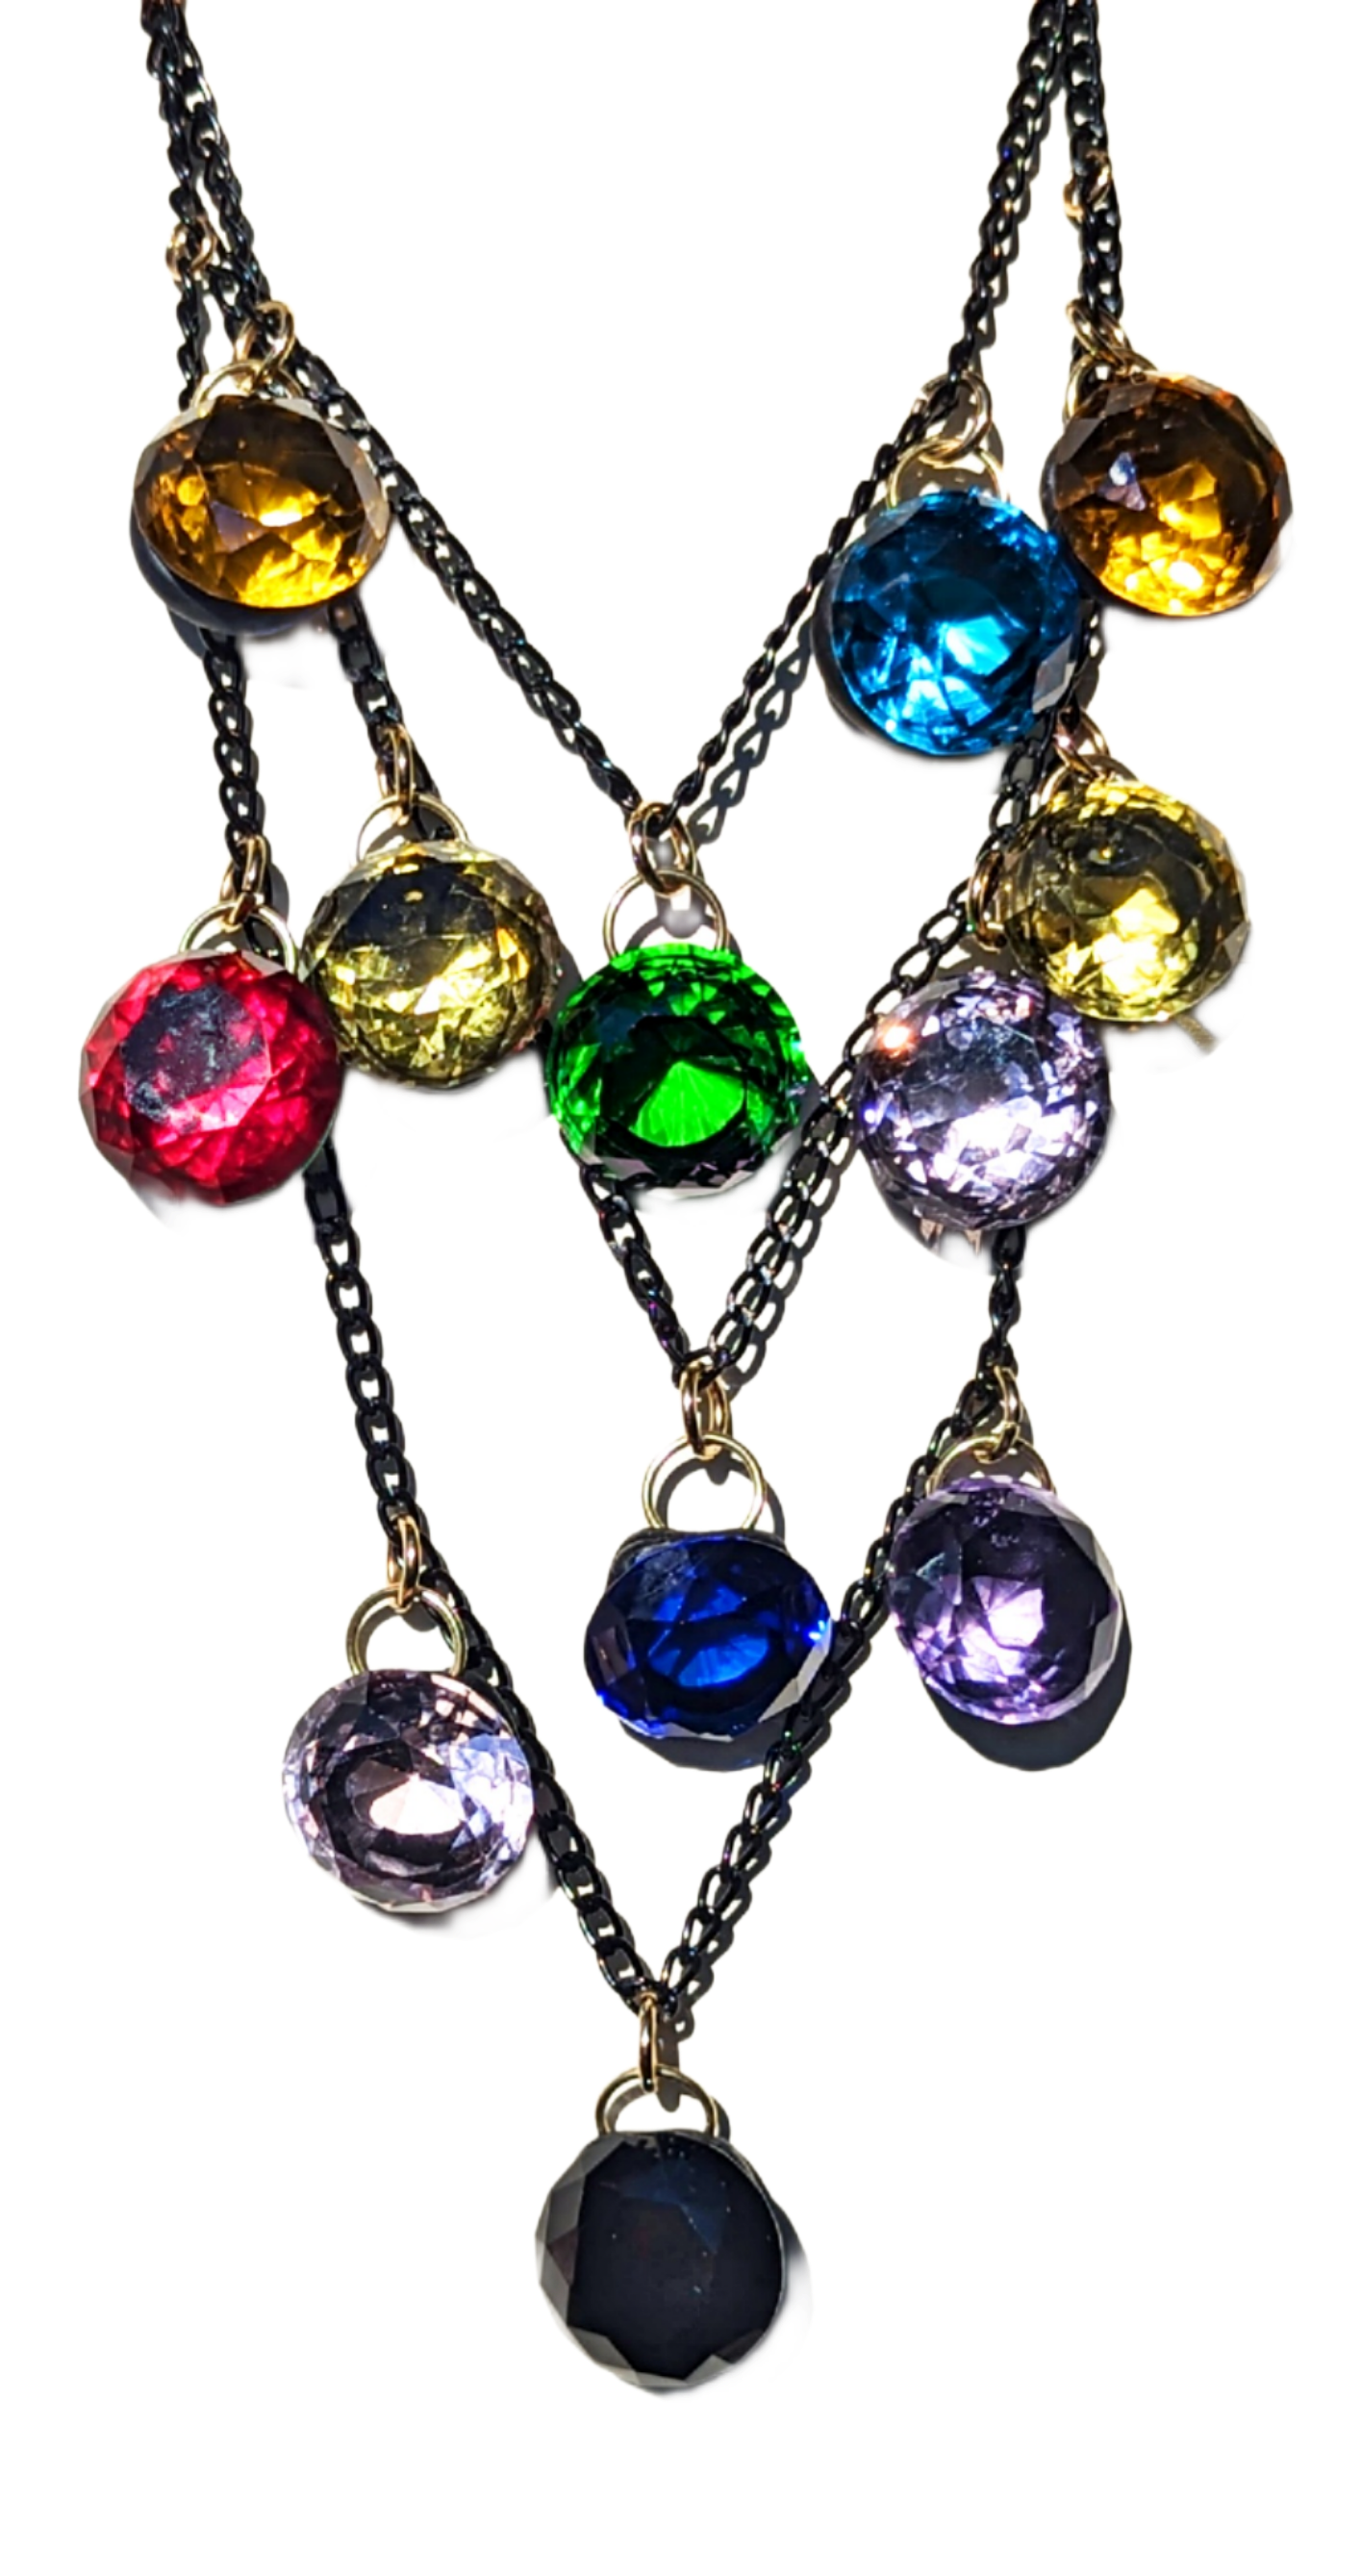 Necklace Multi Layered Colored Crystal Drops on Black Chain Handmade Sugar Gay Isber Stained Glass Inspired